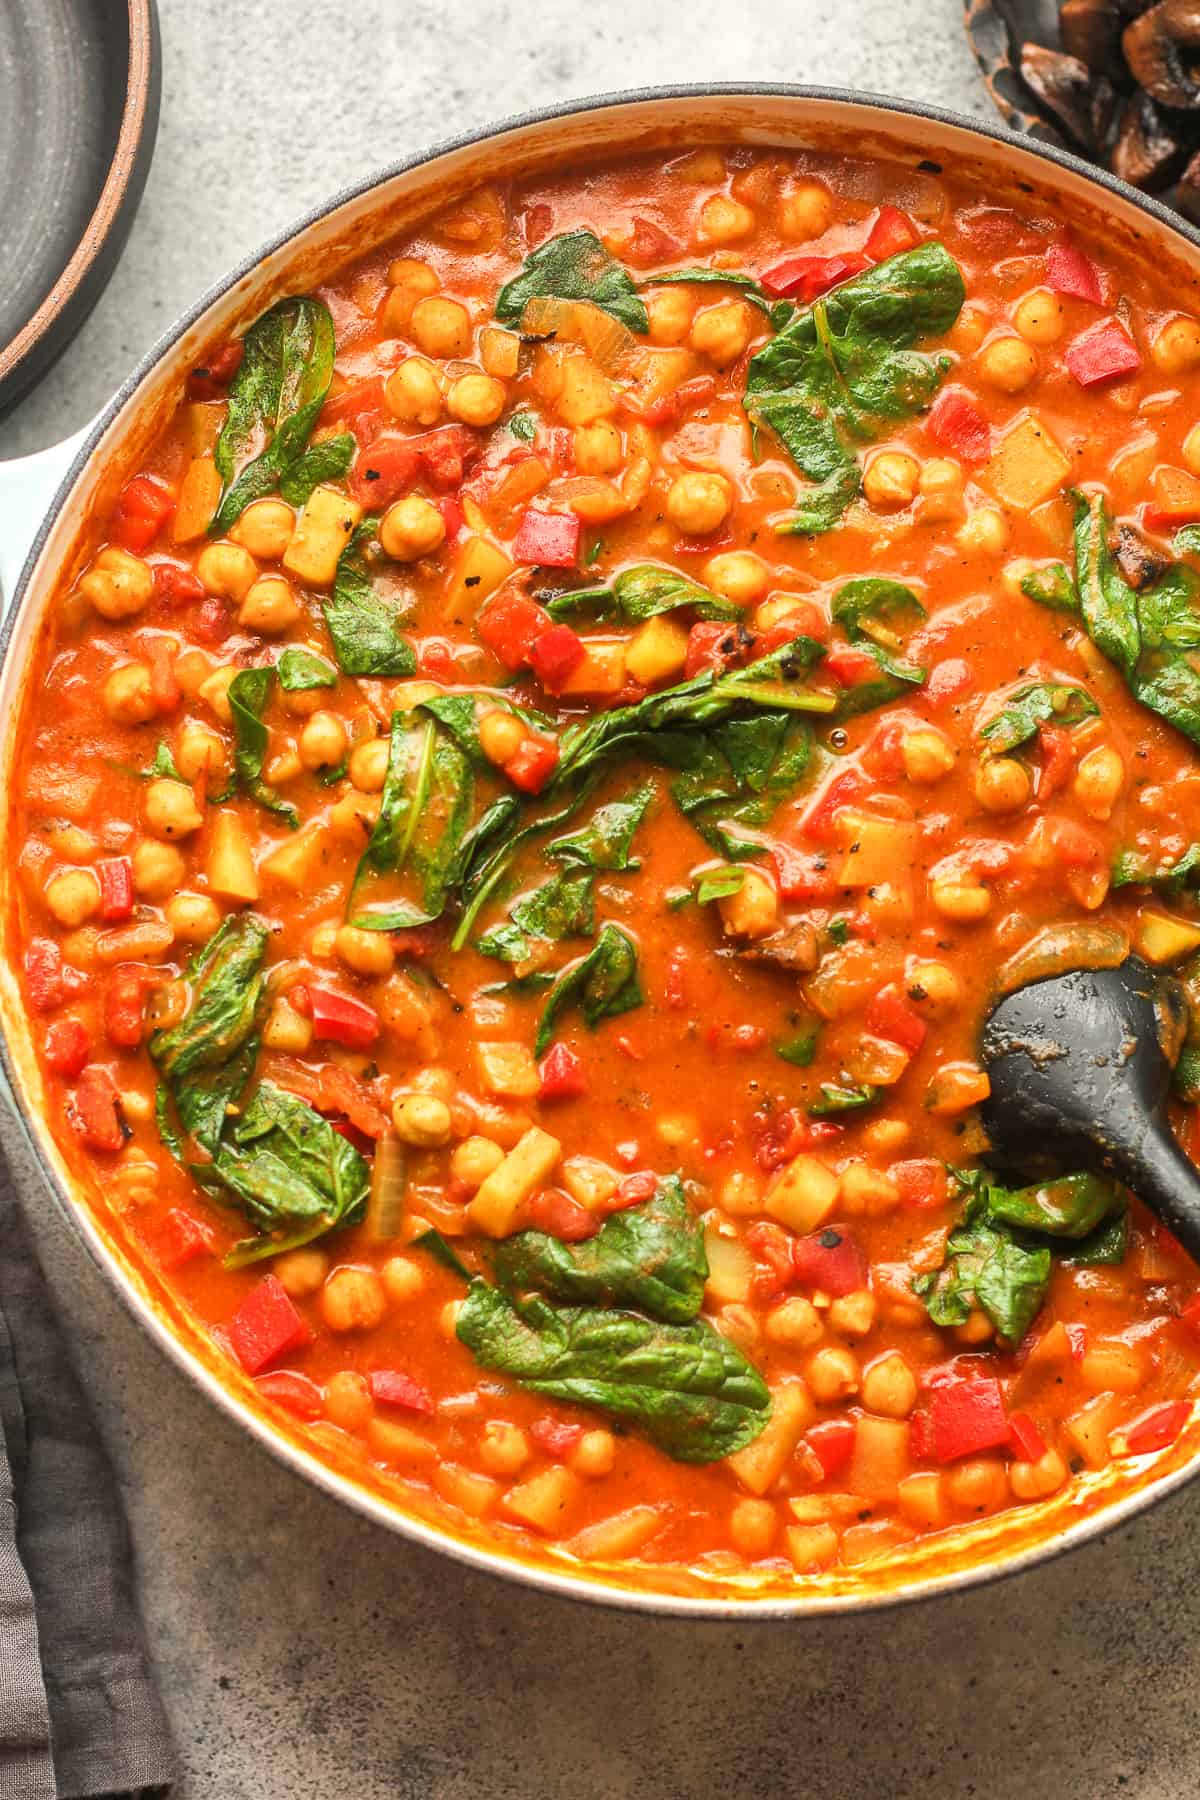 A large pot of chickpea spinach curry on a gray surface.